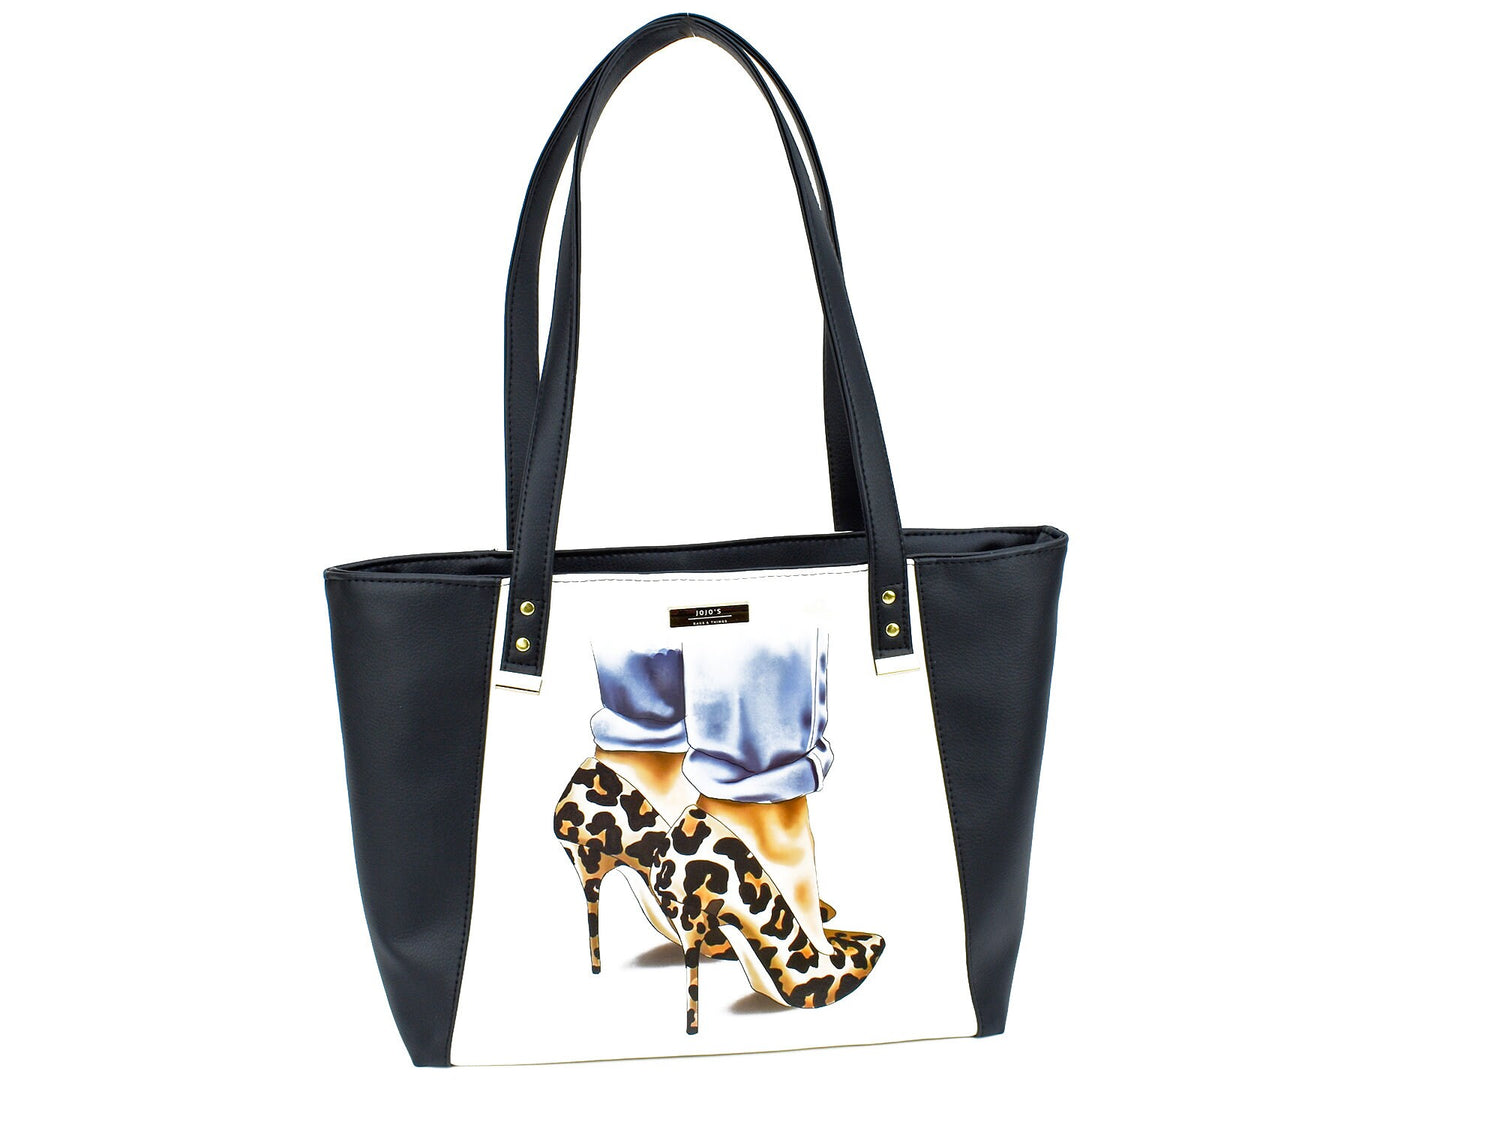 Everyday Tote Styled Purse - High Heel HTV - Large Bag - Cheetah Print Decal - Edgy Gift for Mom - Laptop Carry All - Modern Styled Elegance